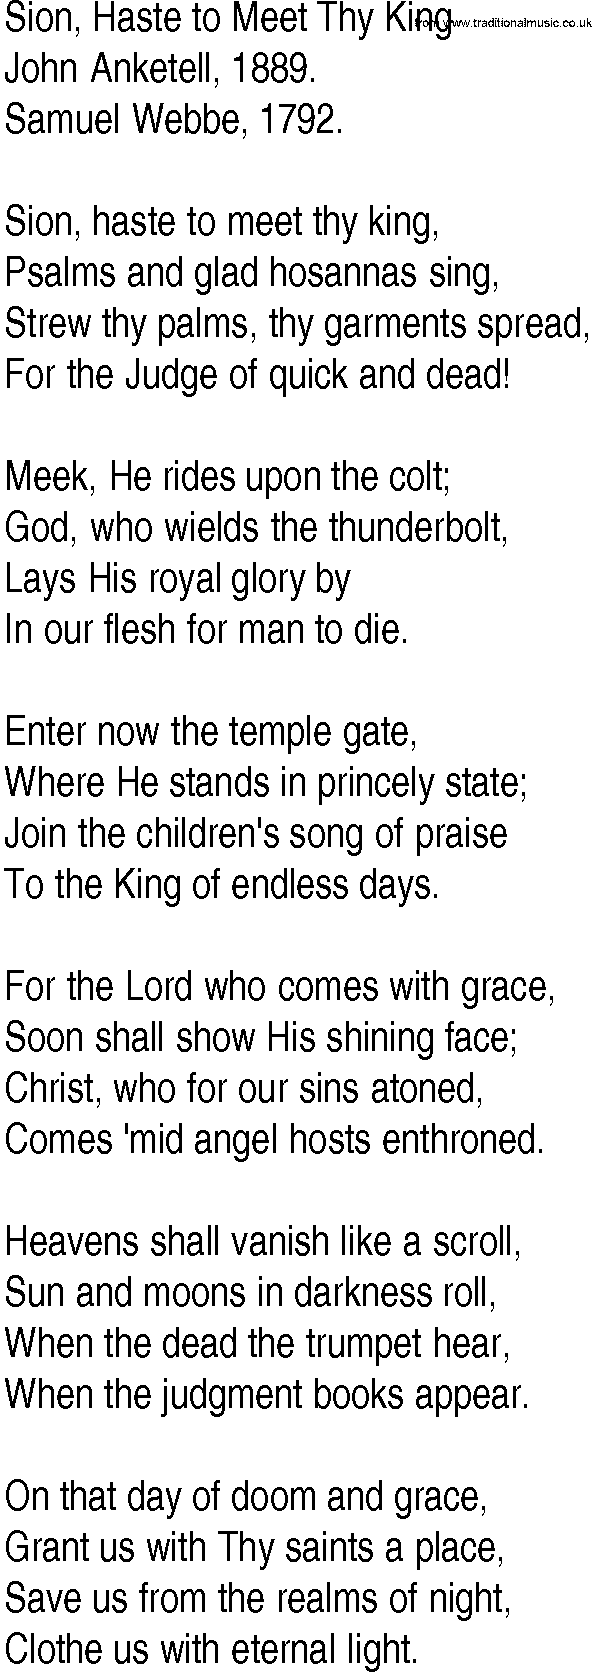 Hymn and Gospel Song: Sion, Haste to Meet Thy King by John Anketell lyrics